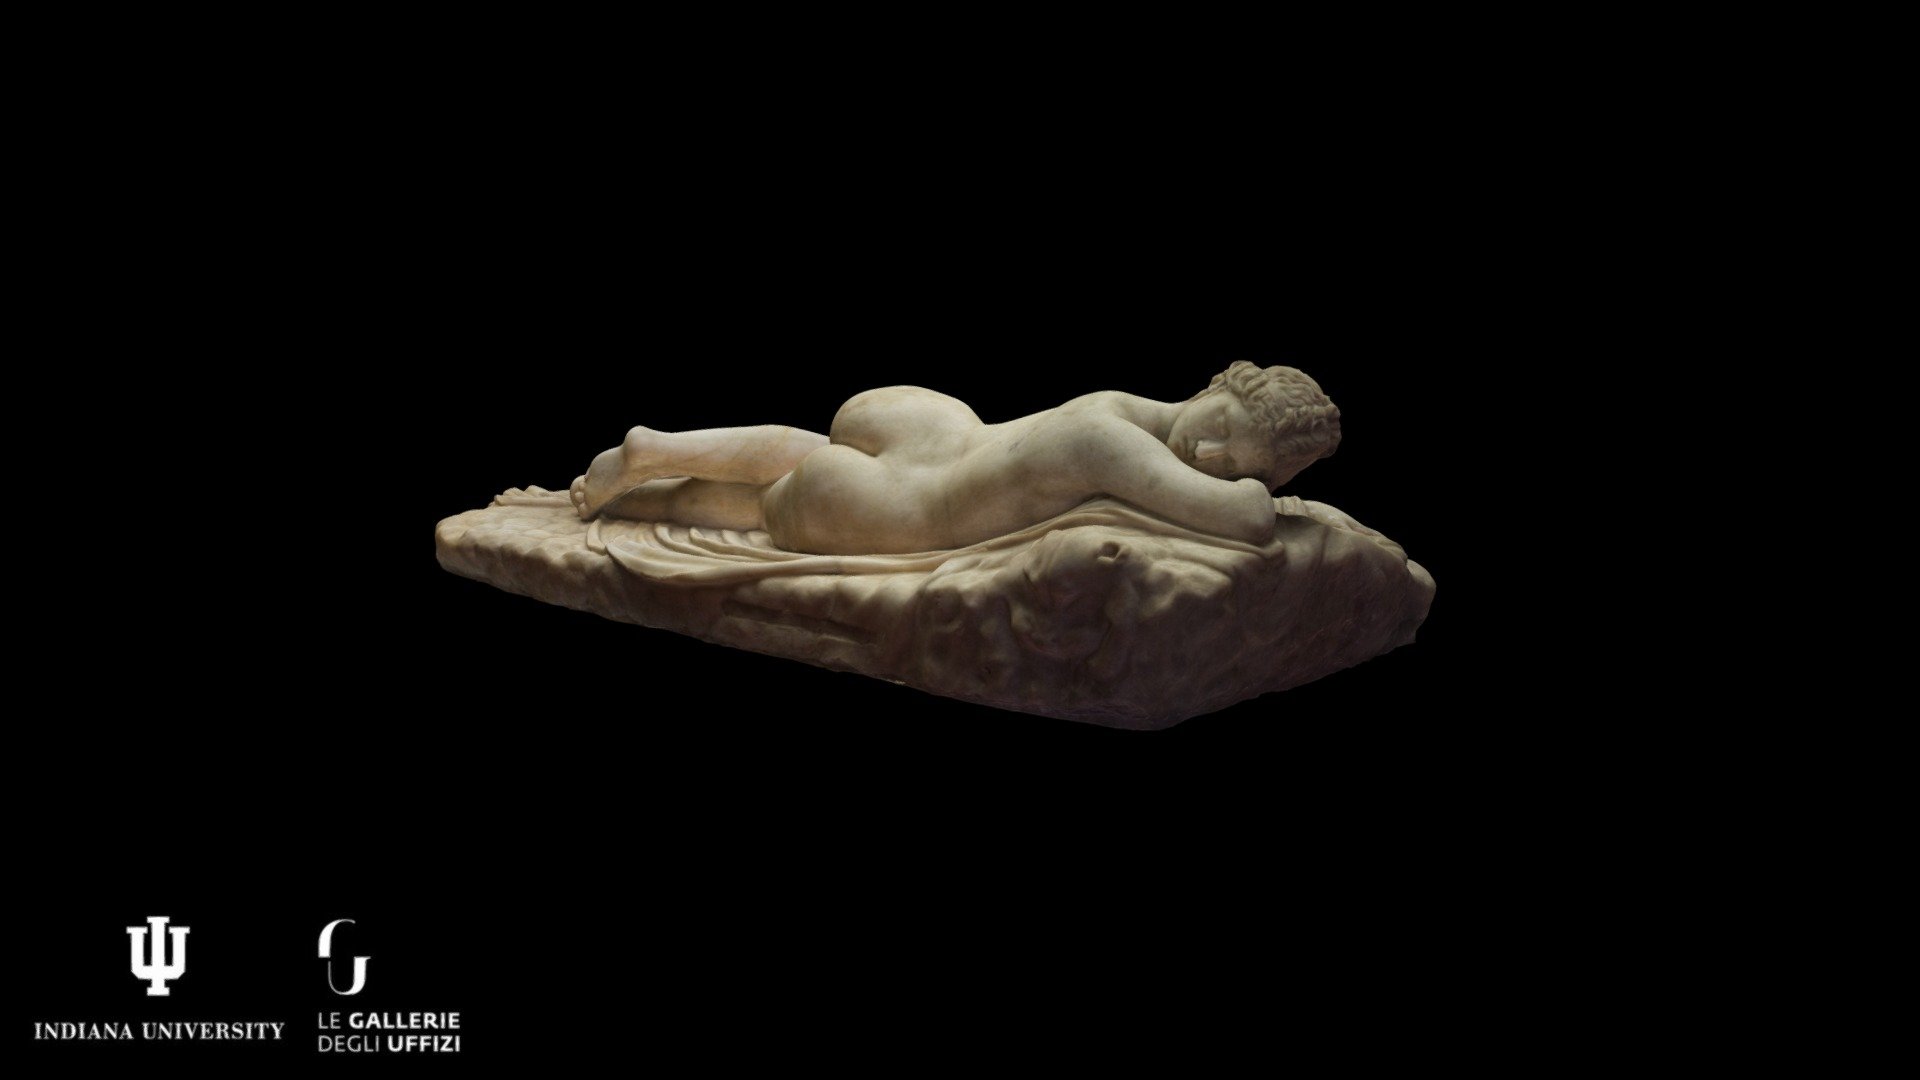 To see our entire collection, check out our website!

Identifiers

Title/Name: Sleeping Hermaphrodite

Inventory: Inv. 1914 n. 343

Mansuelli: 53

**Characteristics **

Format: Statue

Artist: Unknown

Date: 2nd century BCE

Materials: Parian marble

Inscription: n/a

Dimensions:  W 0.68 m; L 1.52 m

Paradata

Camera: Nikon D810 with Nikkor 24-85mm F/2.4-4 lens

Photographer: Leif Christiansen

Reconstruction Software: RealityCapture, ZBrush

Modeler: Leif Christiansen

Studi e Restauri Publication: Anguissola, Anna. &ldquo;Nec utrumque et utrumque videtur: osservazioni sull'Ermafrodito addormentato degli Uffizi,